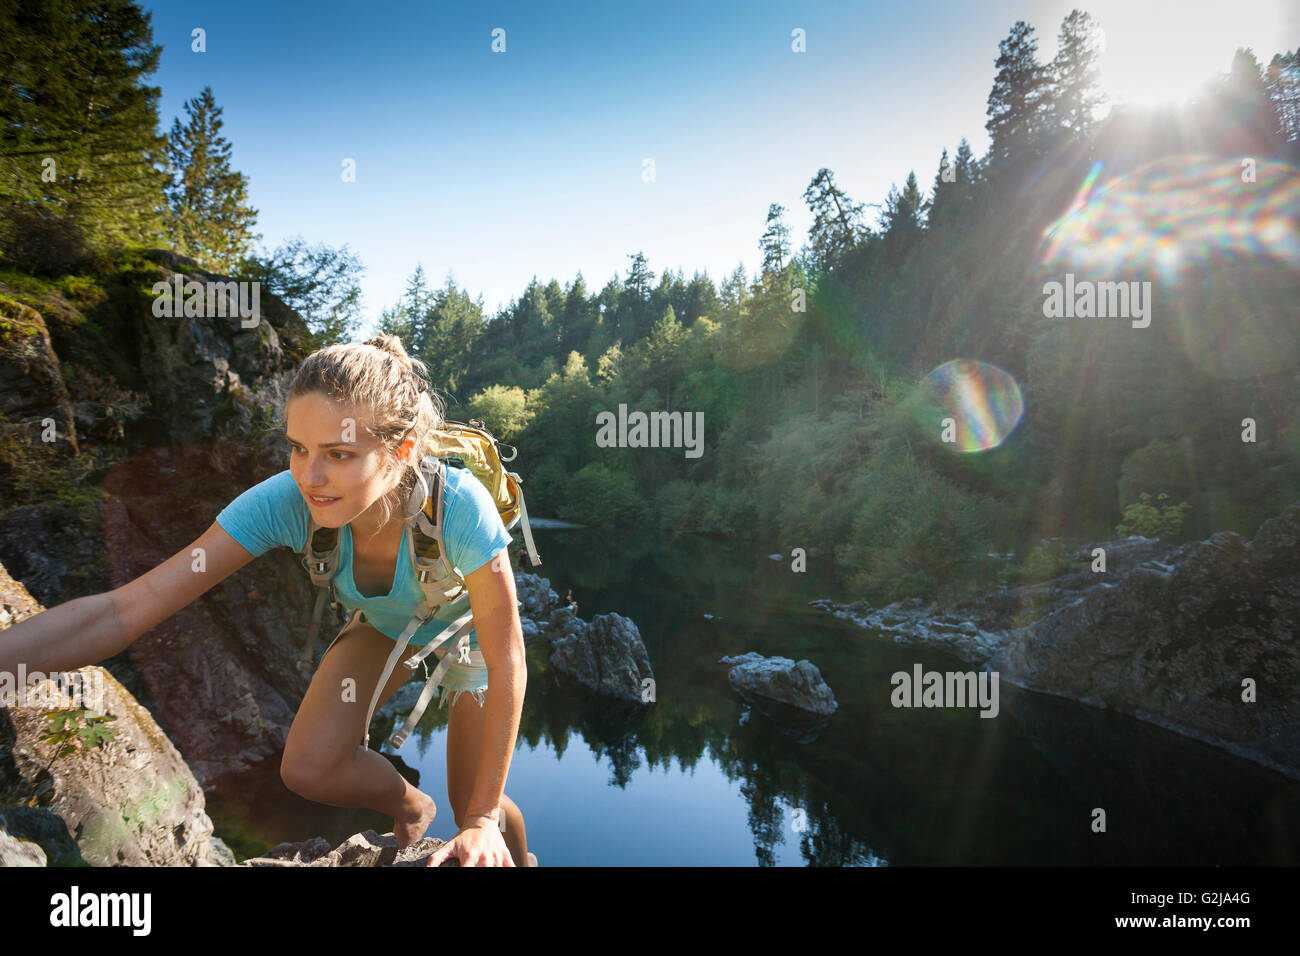 A young woman climbs rocky cliffs at the Sooke Potholes Provincial Park, Vancouver Island, BC, Canada Stock Photo